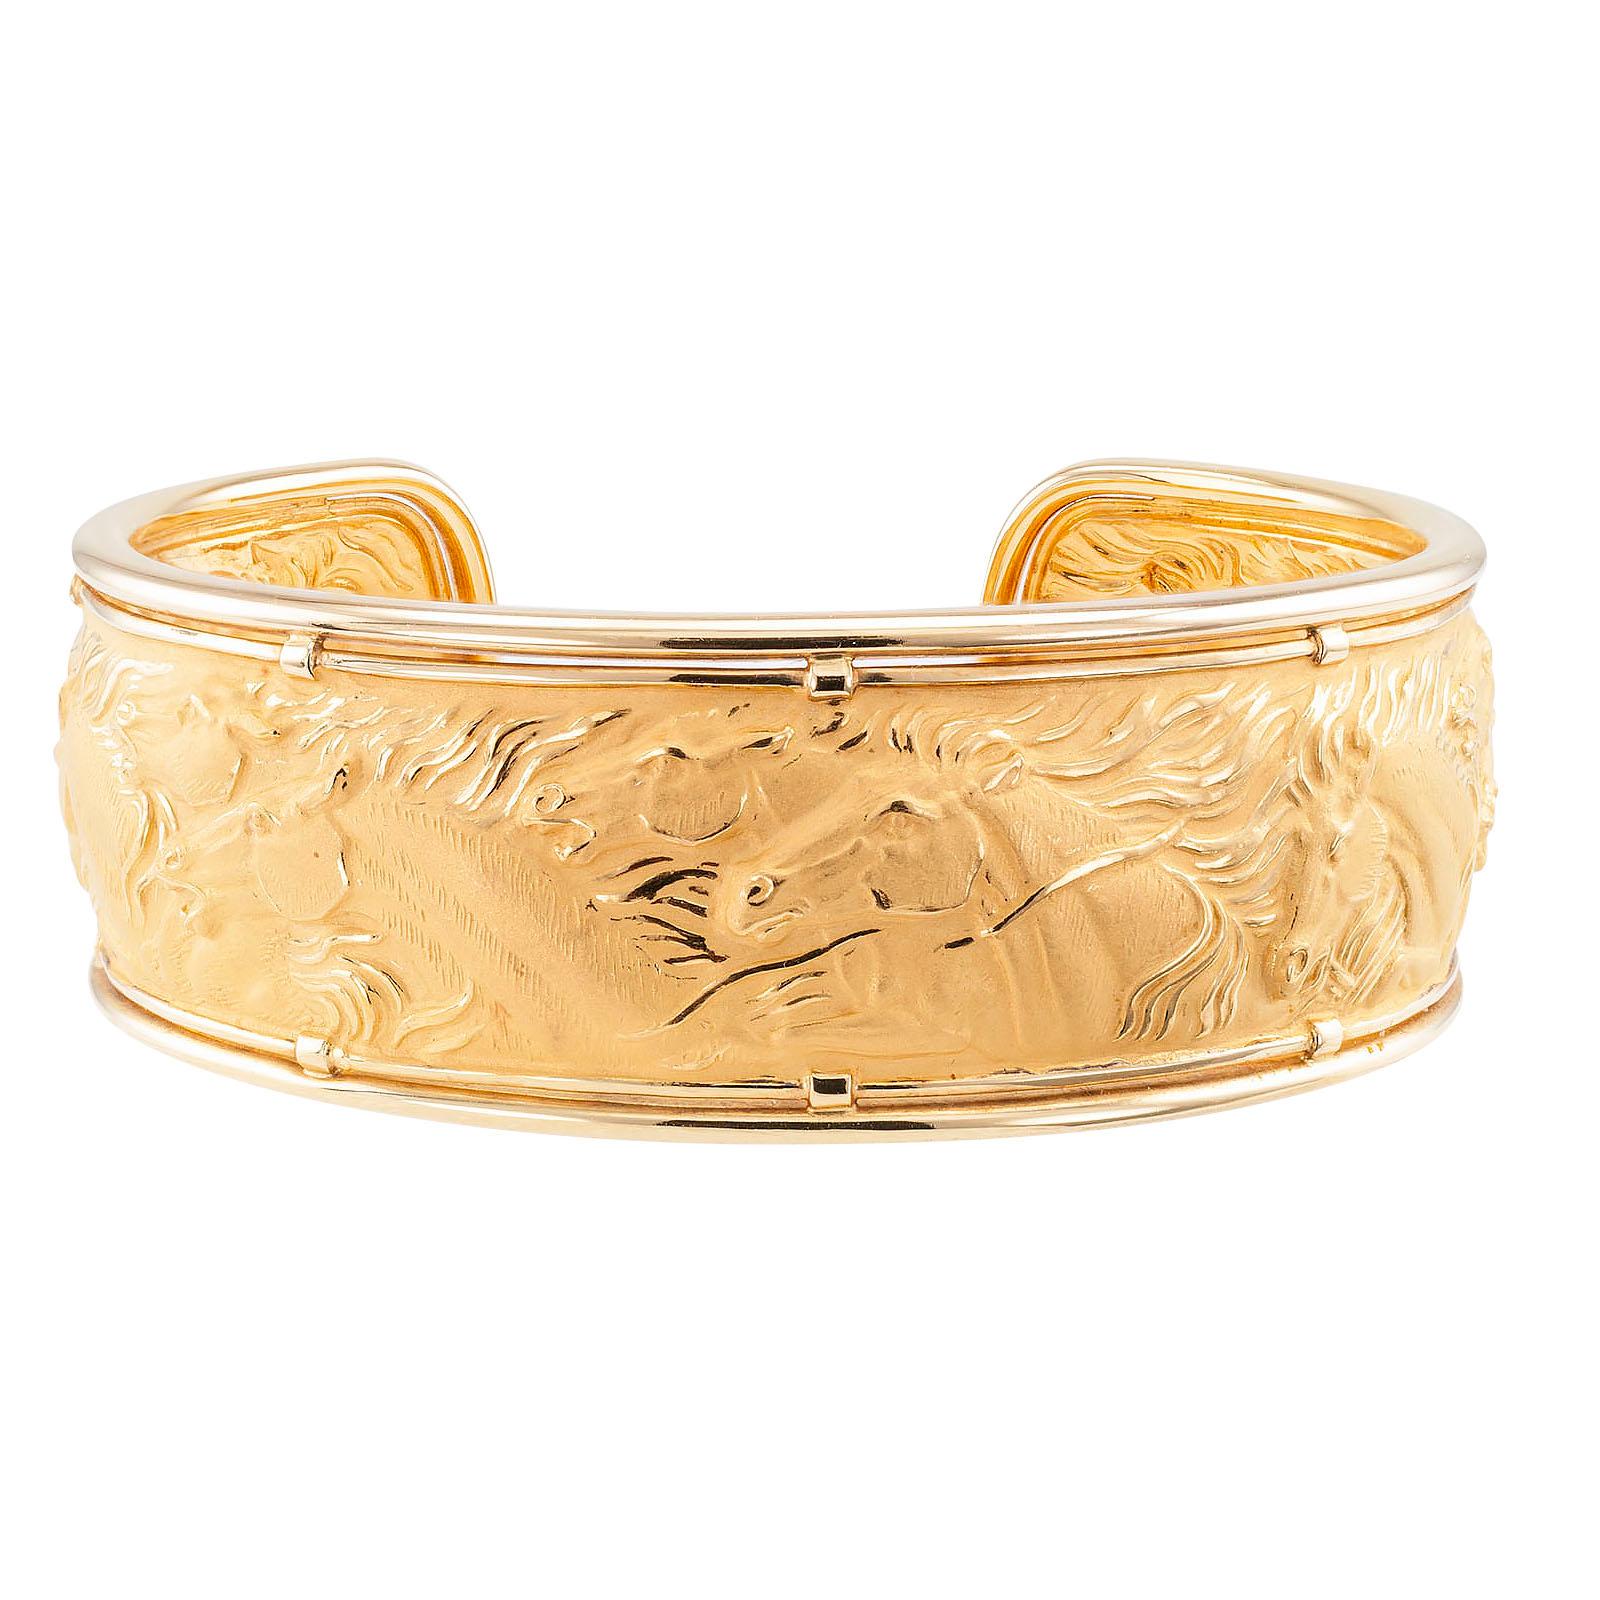 Carrera y Carrera yellow gold horse cuff bracelet.

DETAILS:
METAL: 18-karat yellow gold decorated by an equestrian theme in relief.

HALLMARKS: maker’s marks for Carrera y Carrera, numbered 170483.

MEASUREMENTS: approximately 7/8” (16 mm) wide,